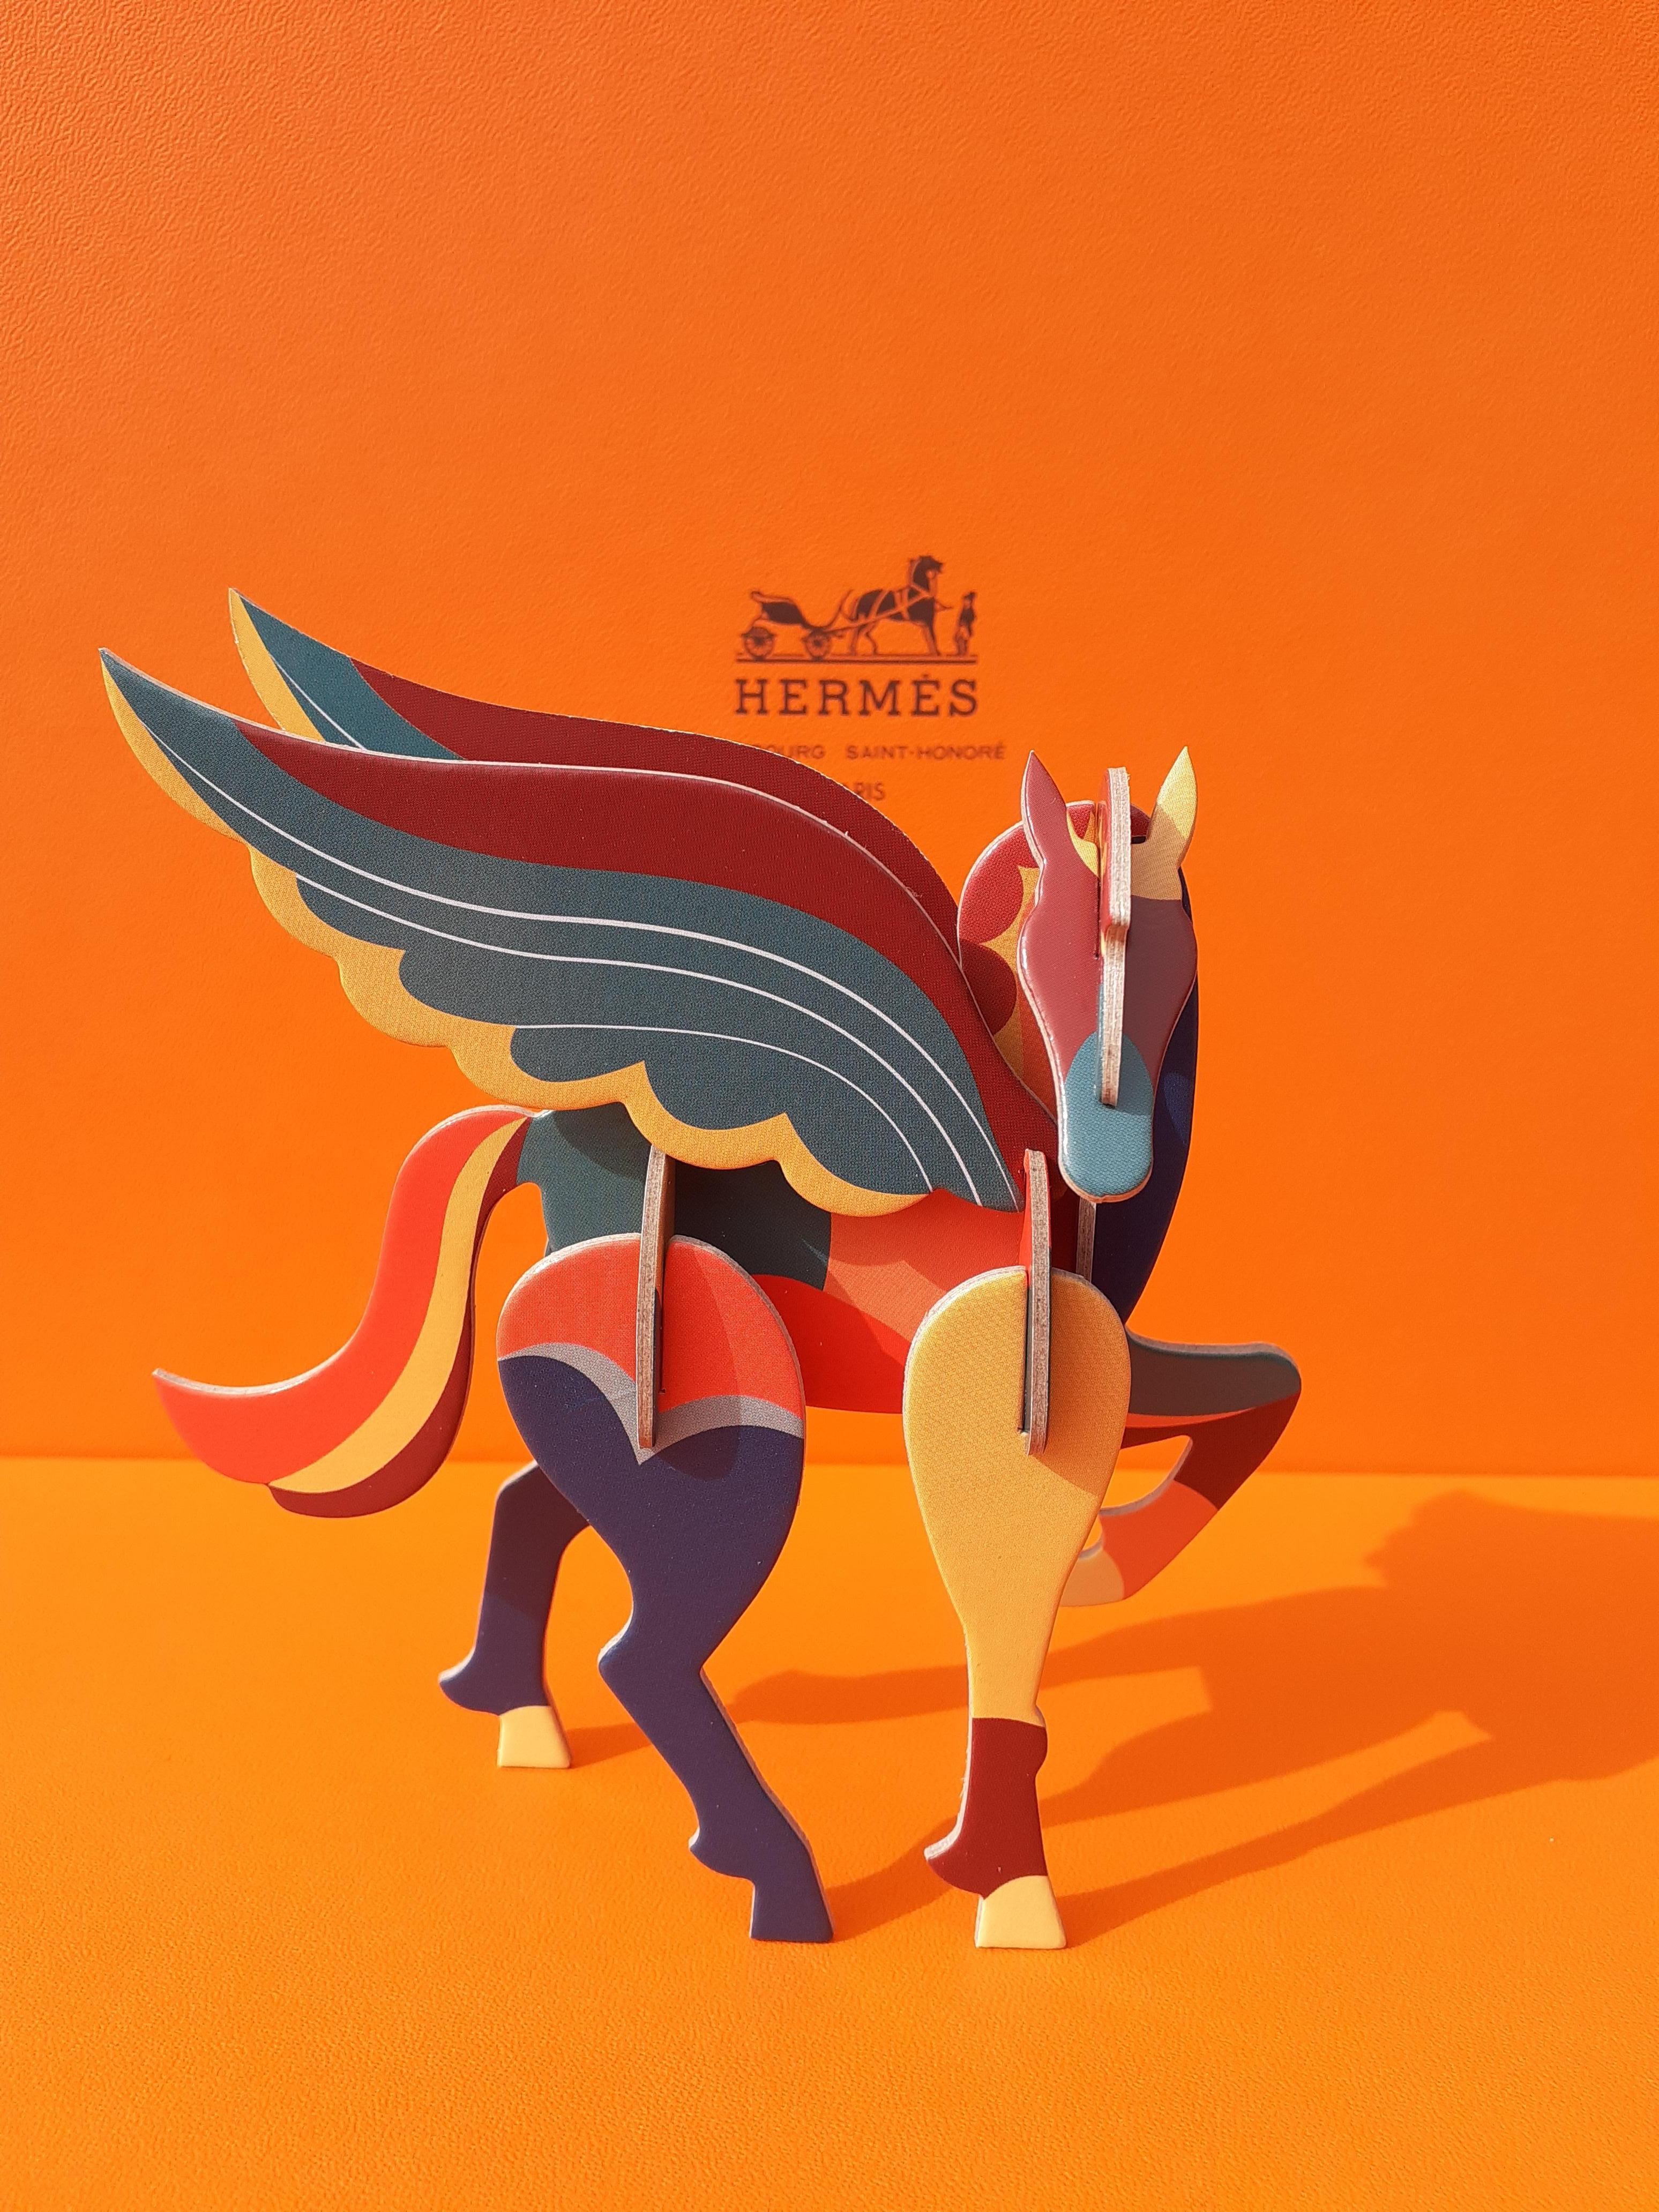 Super Cute Authentic Hermès Pegasus

Composed of 11 pieces of cardboard to assemble

A blue string will allow to suspend it

The assembly instructions are inside the packaging

Colorways: Blue, Orange, Yellow, Green, Burgundy

Measurements (around):